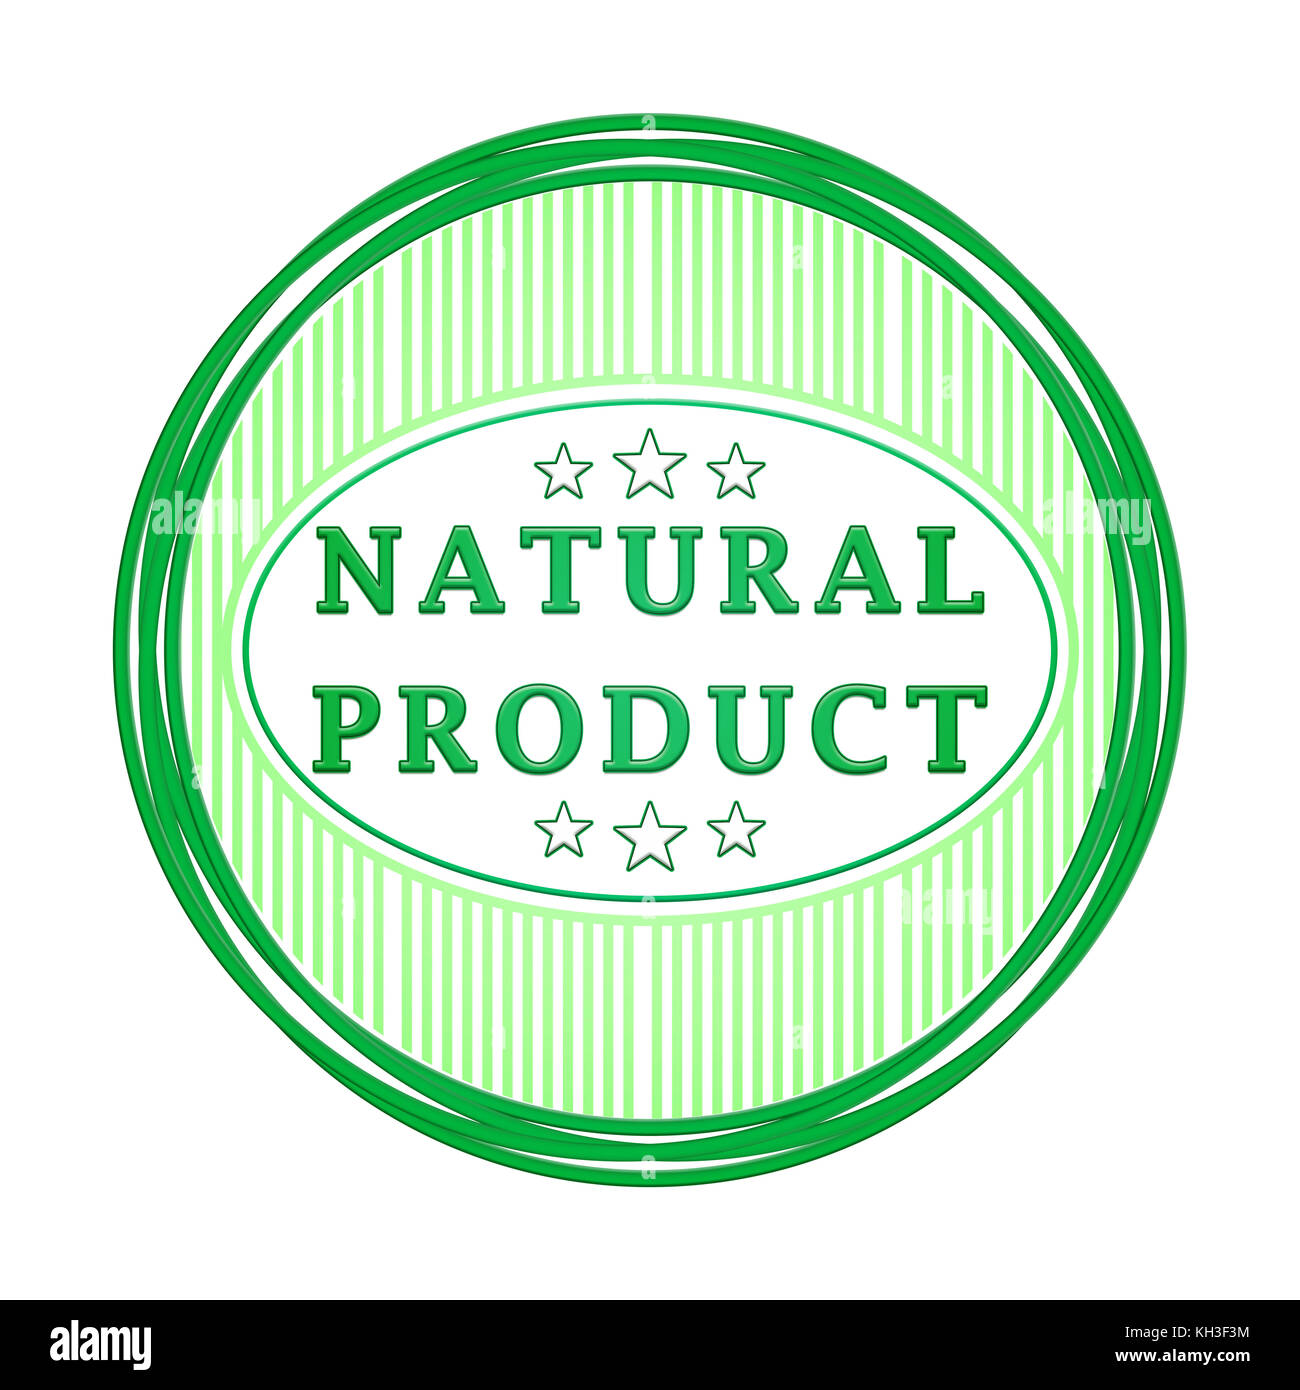 Natural product label. Circle with stripes and stars on a white background Stock Photo